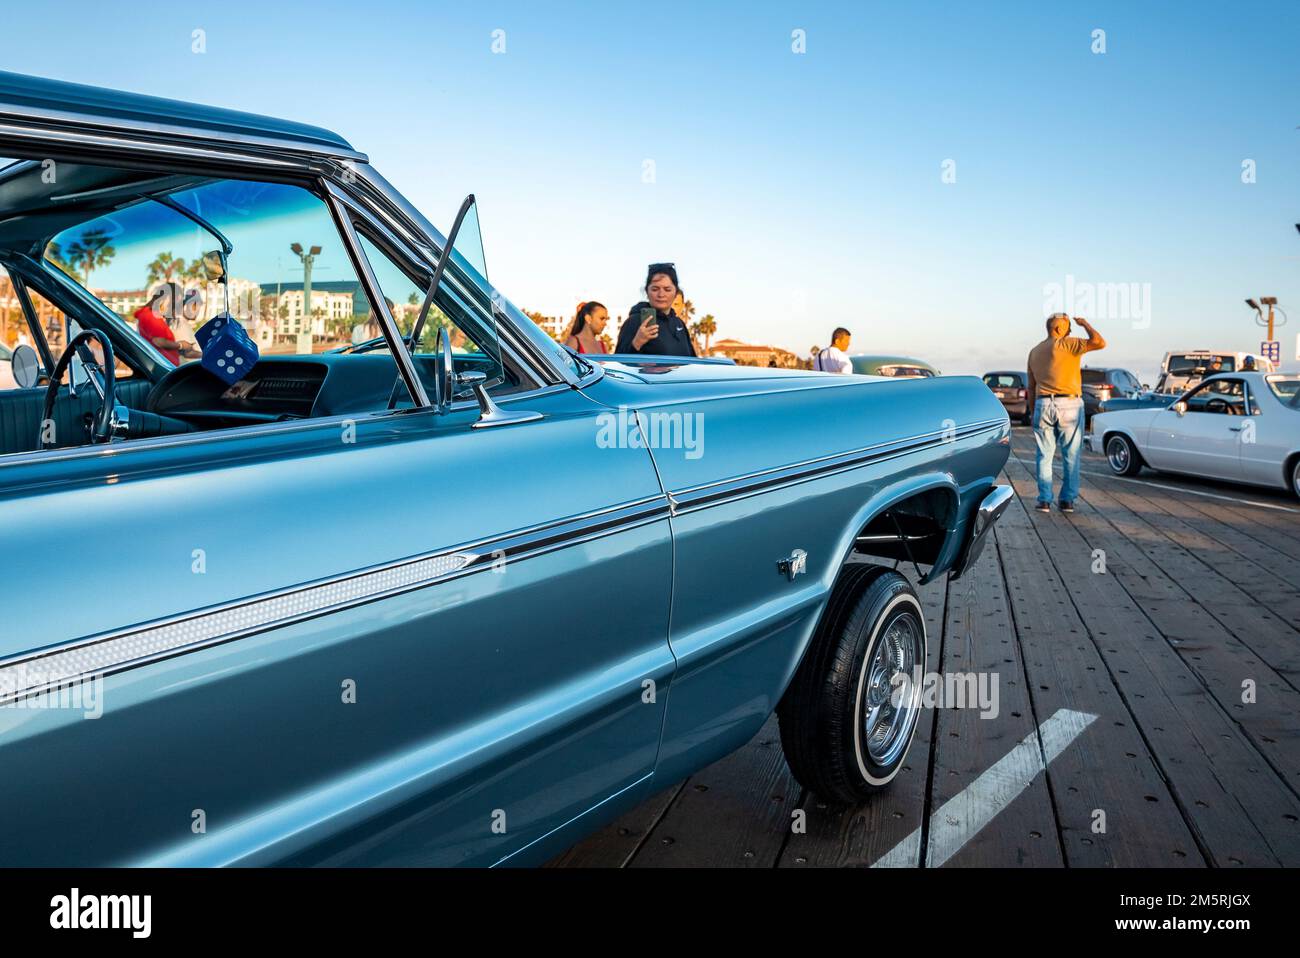 Vintage blue car model displayed during classic car show at Santa Monica pier Stock Photo